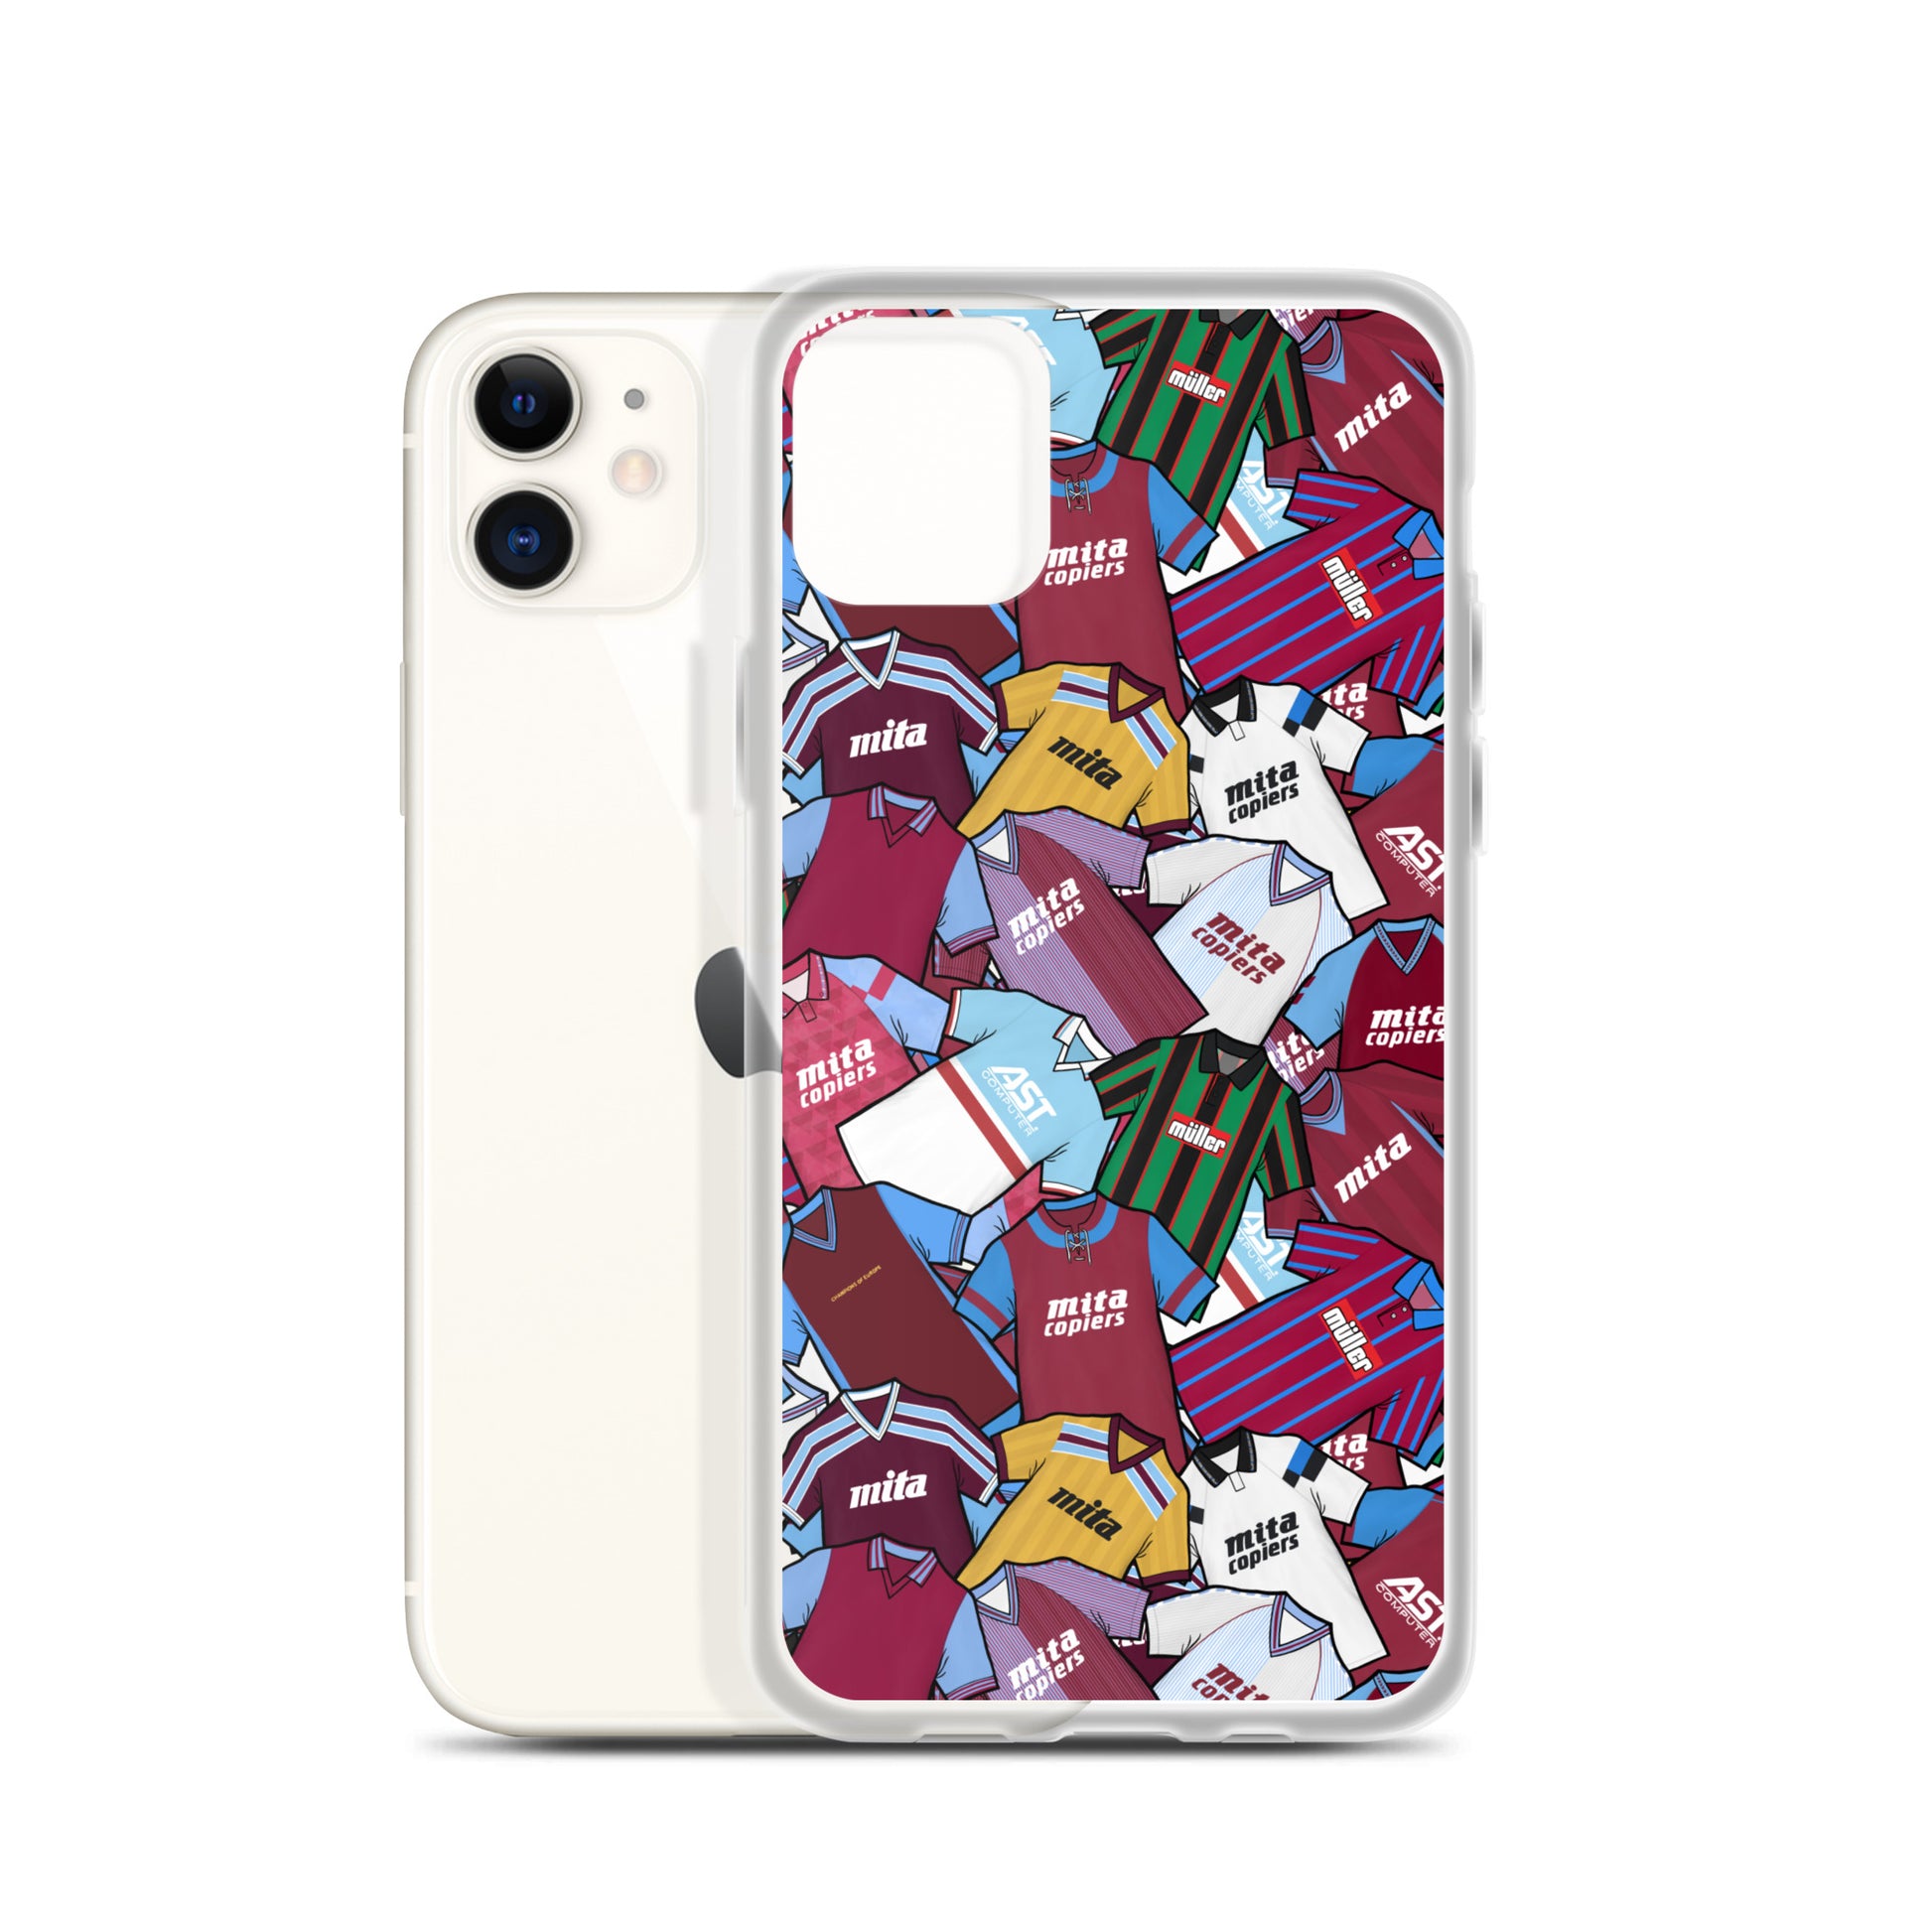 Unique and high-quality phone cases showcasing artwork of Aston Villa's retro jerseys. Stand out from the crowd with these stylish and nostalgic designs - perfect for any Villa fan looking to add a touch of retro flair to their phone